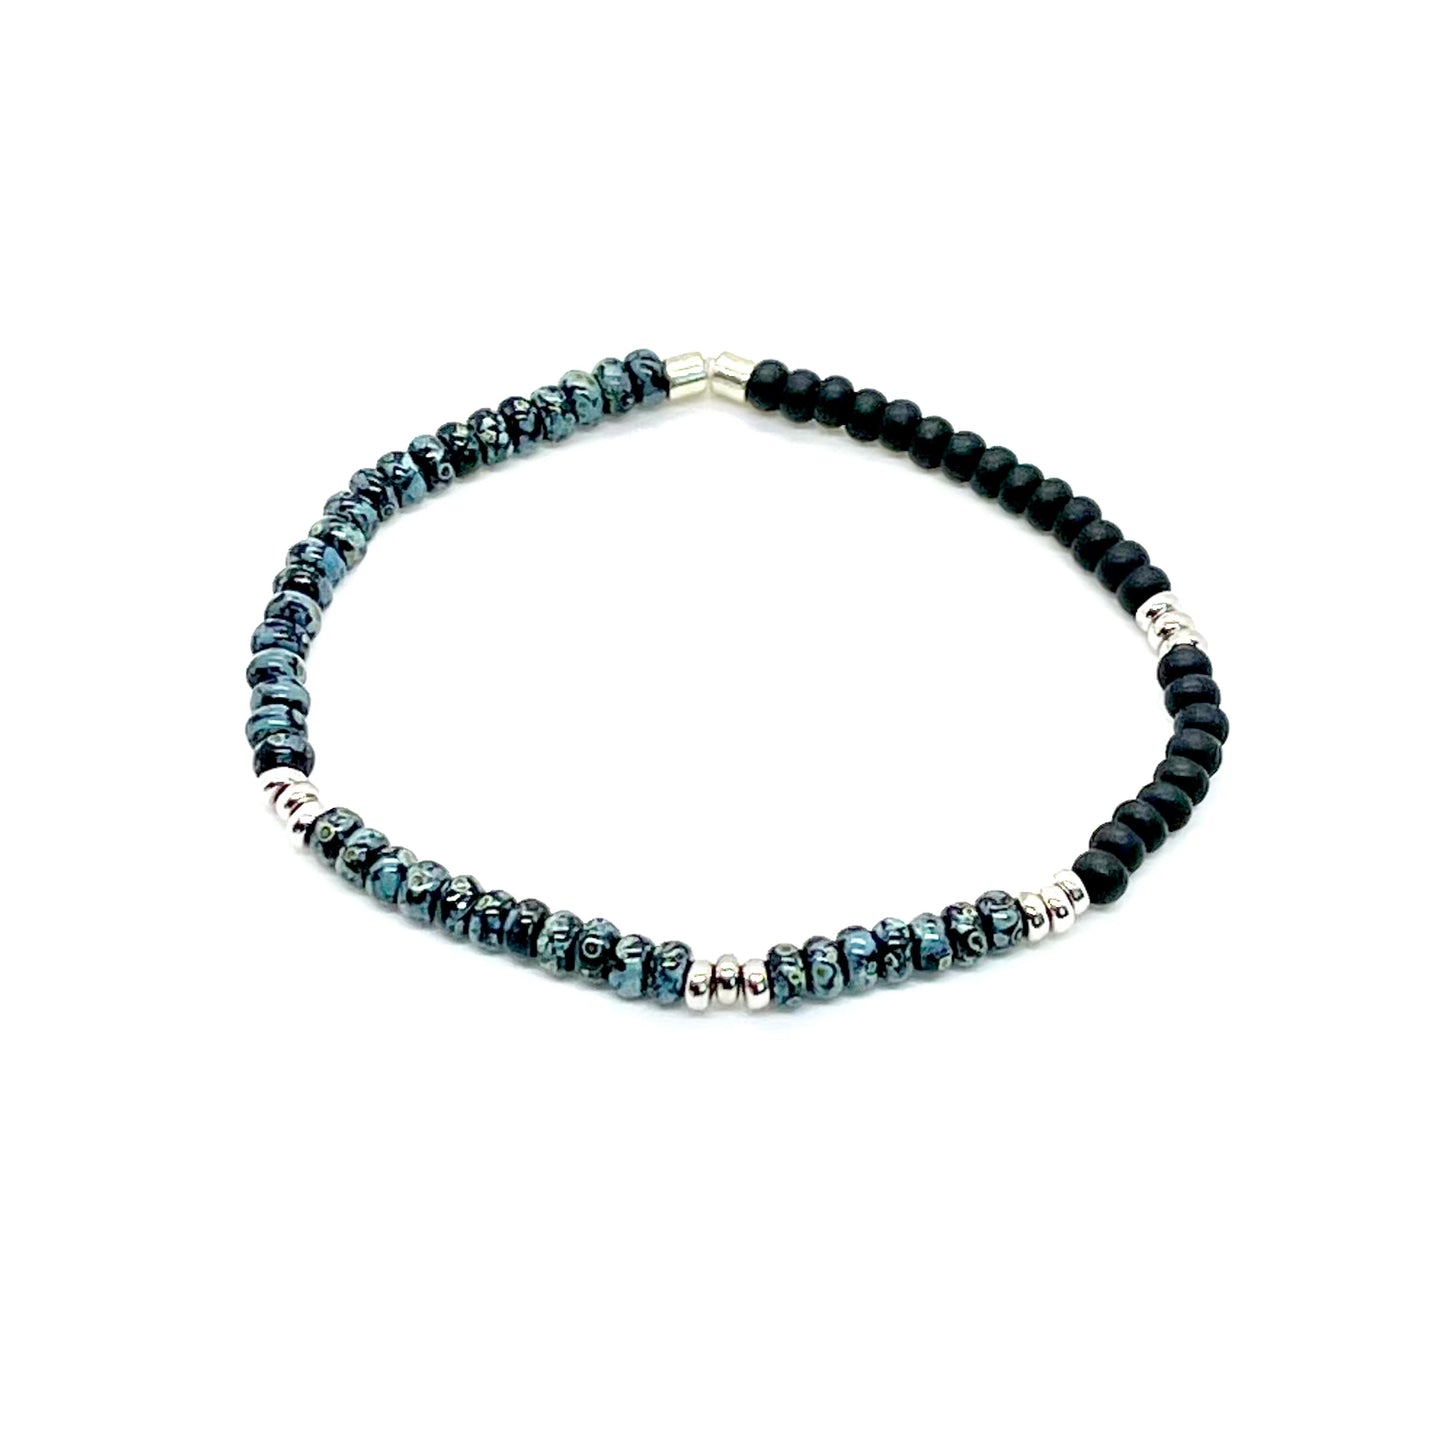 Men's blue speckled seed bead bracelet with black beads and silver accent disks on elastic stretch cord.